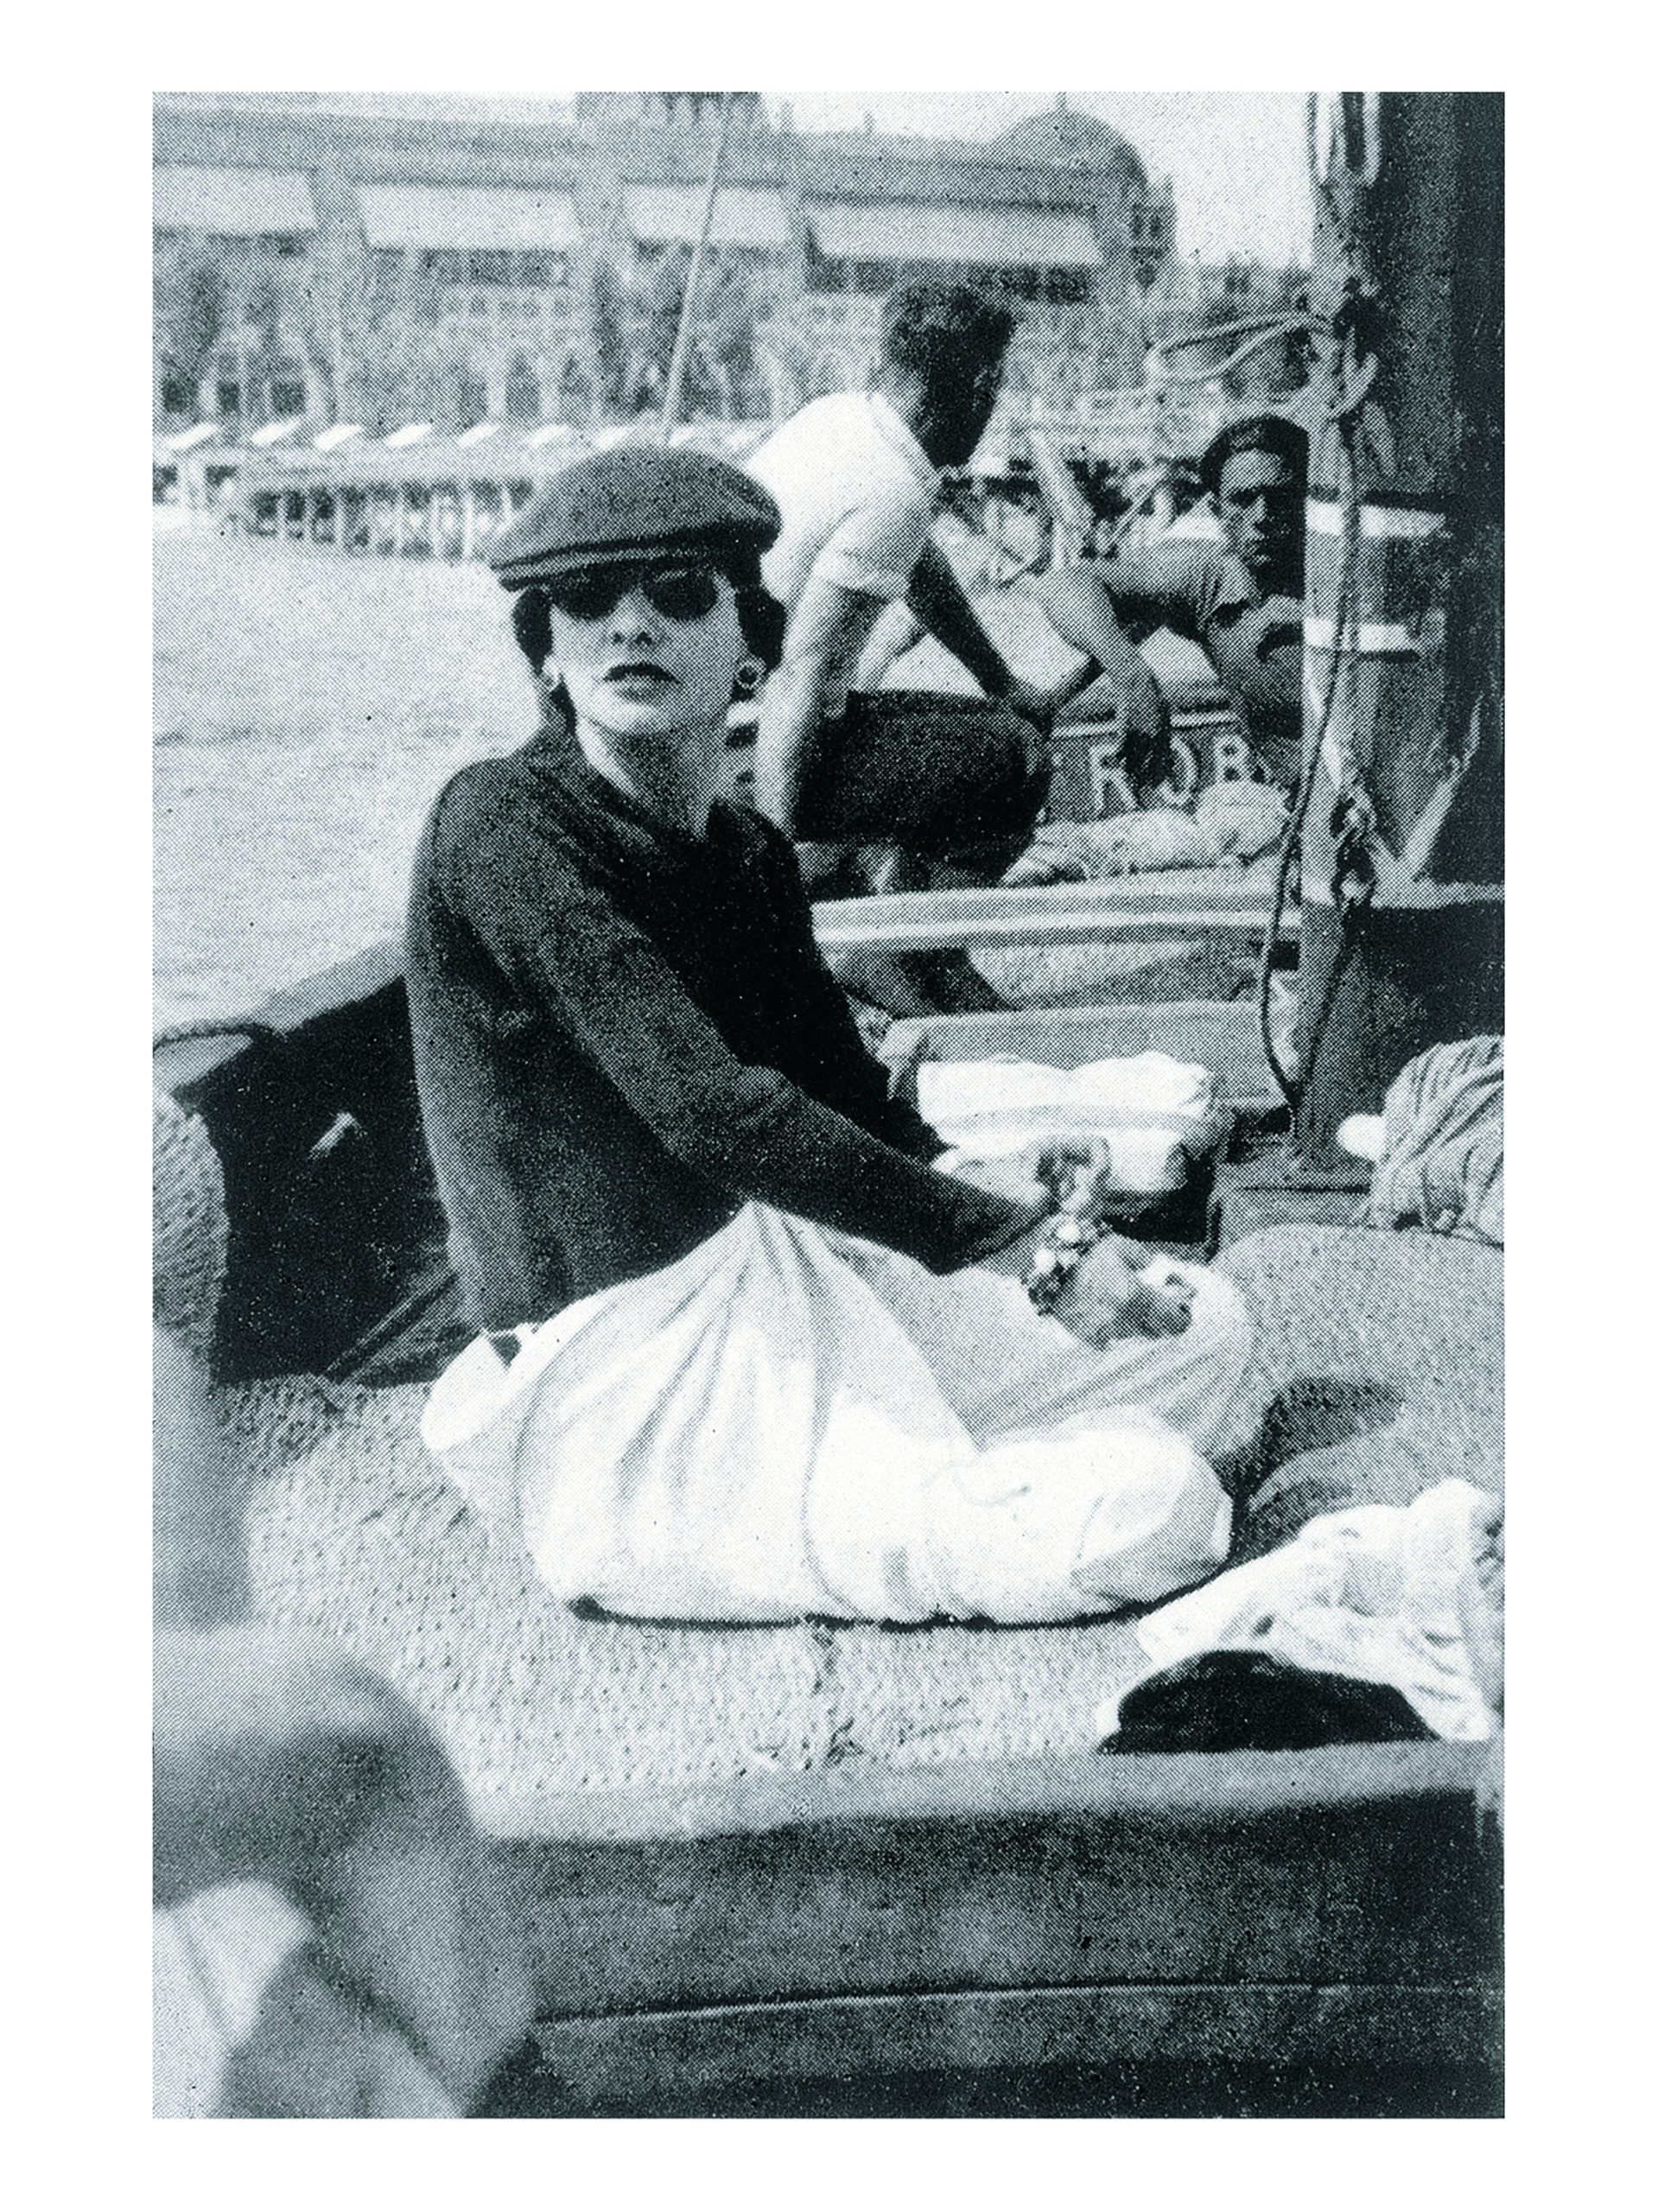 01_1936_Gabrielle_Chanel_on_Roussy_Sert_s_yatch_in_front_of_the_Lido_of_Venice_copyright_V_H_Grandpierre_Vogue_Paris_HD